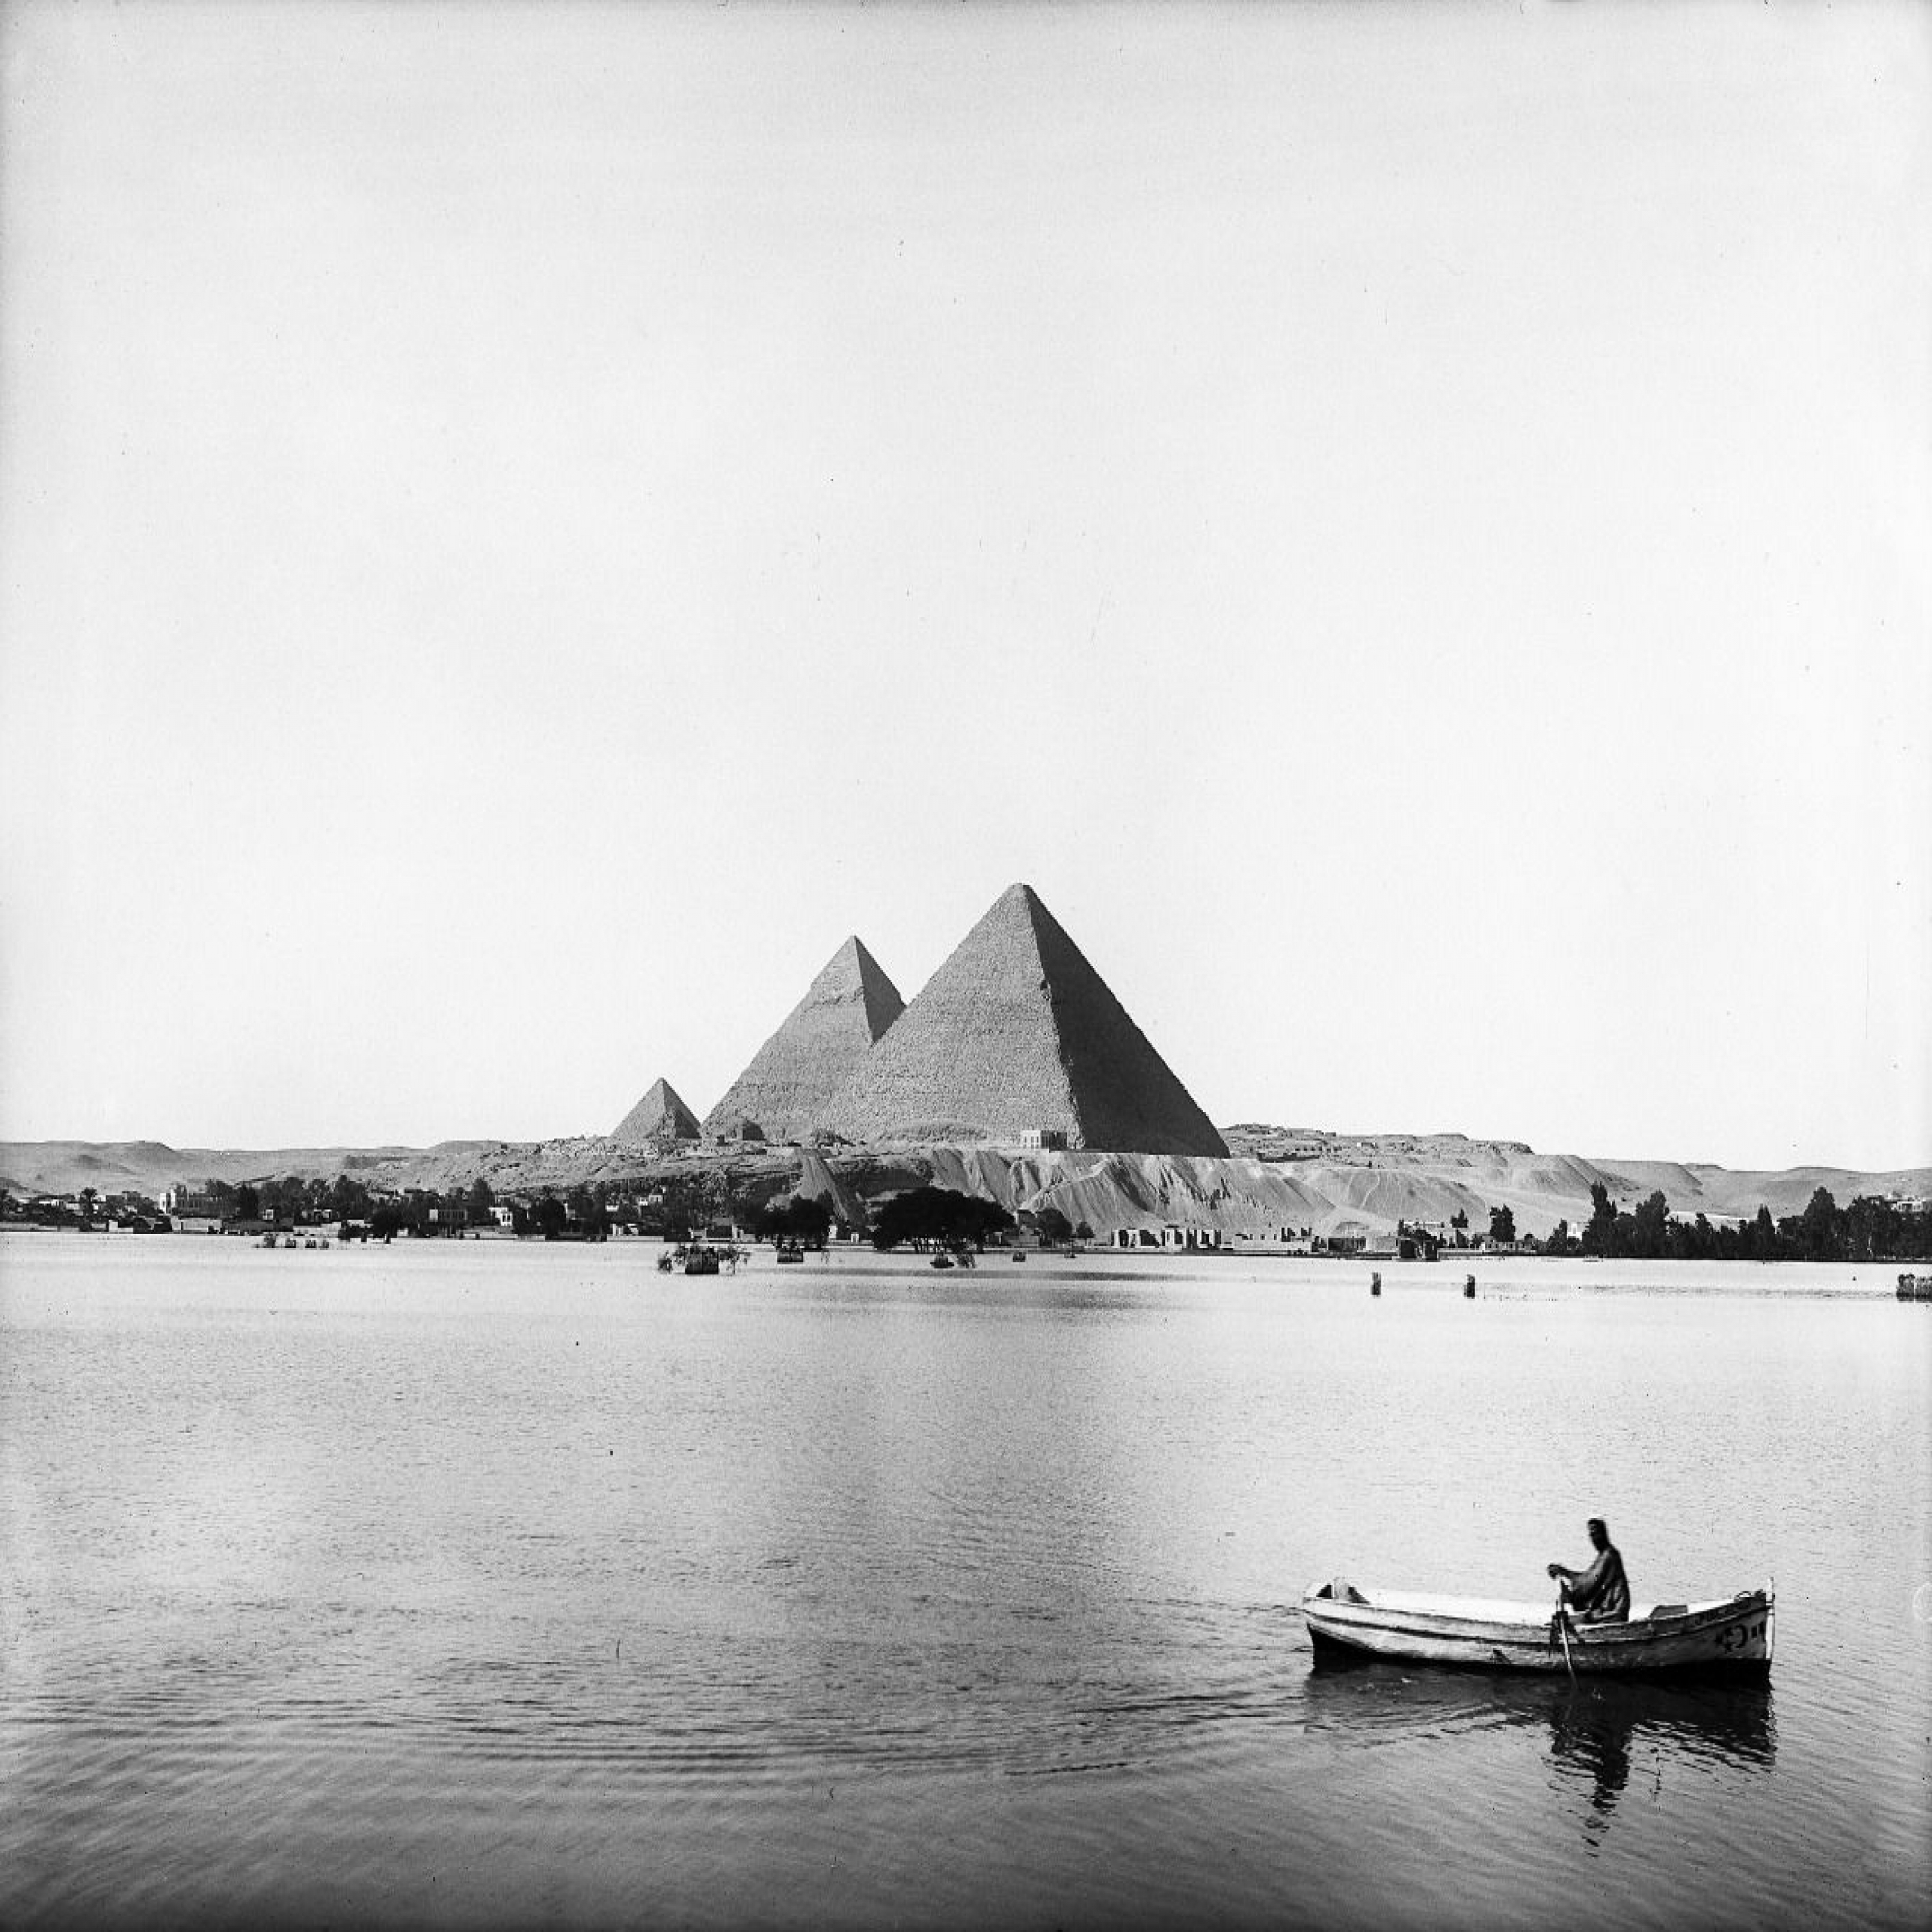 Holiday On The Nile